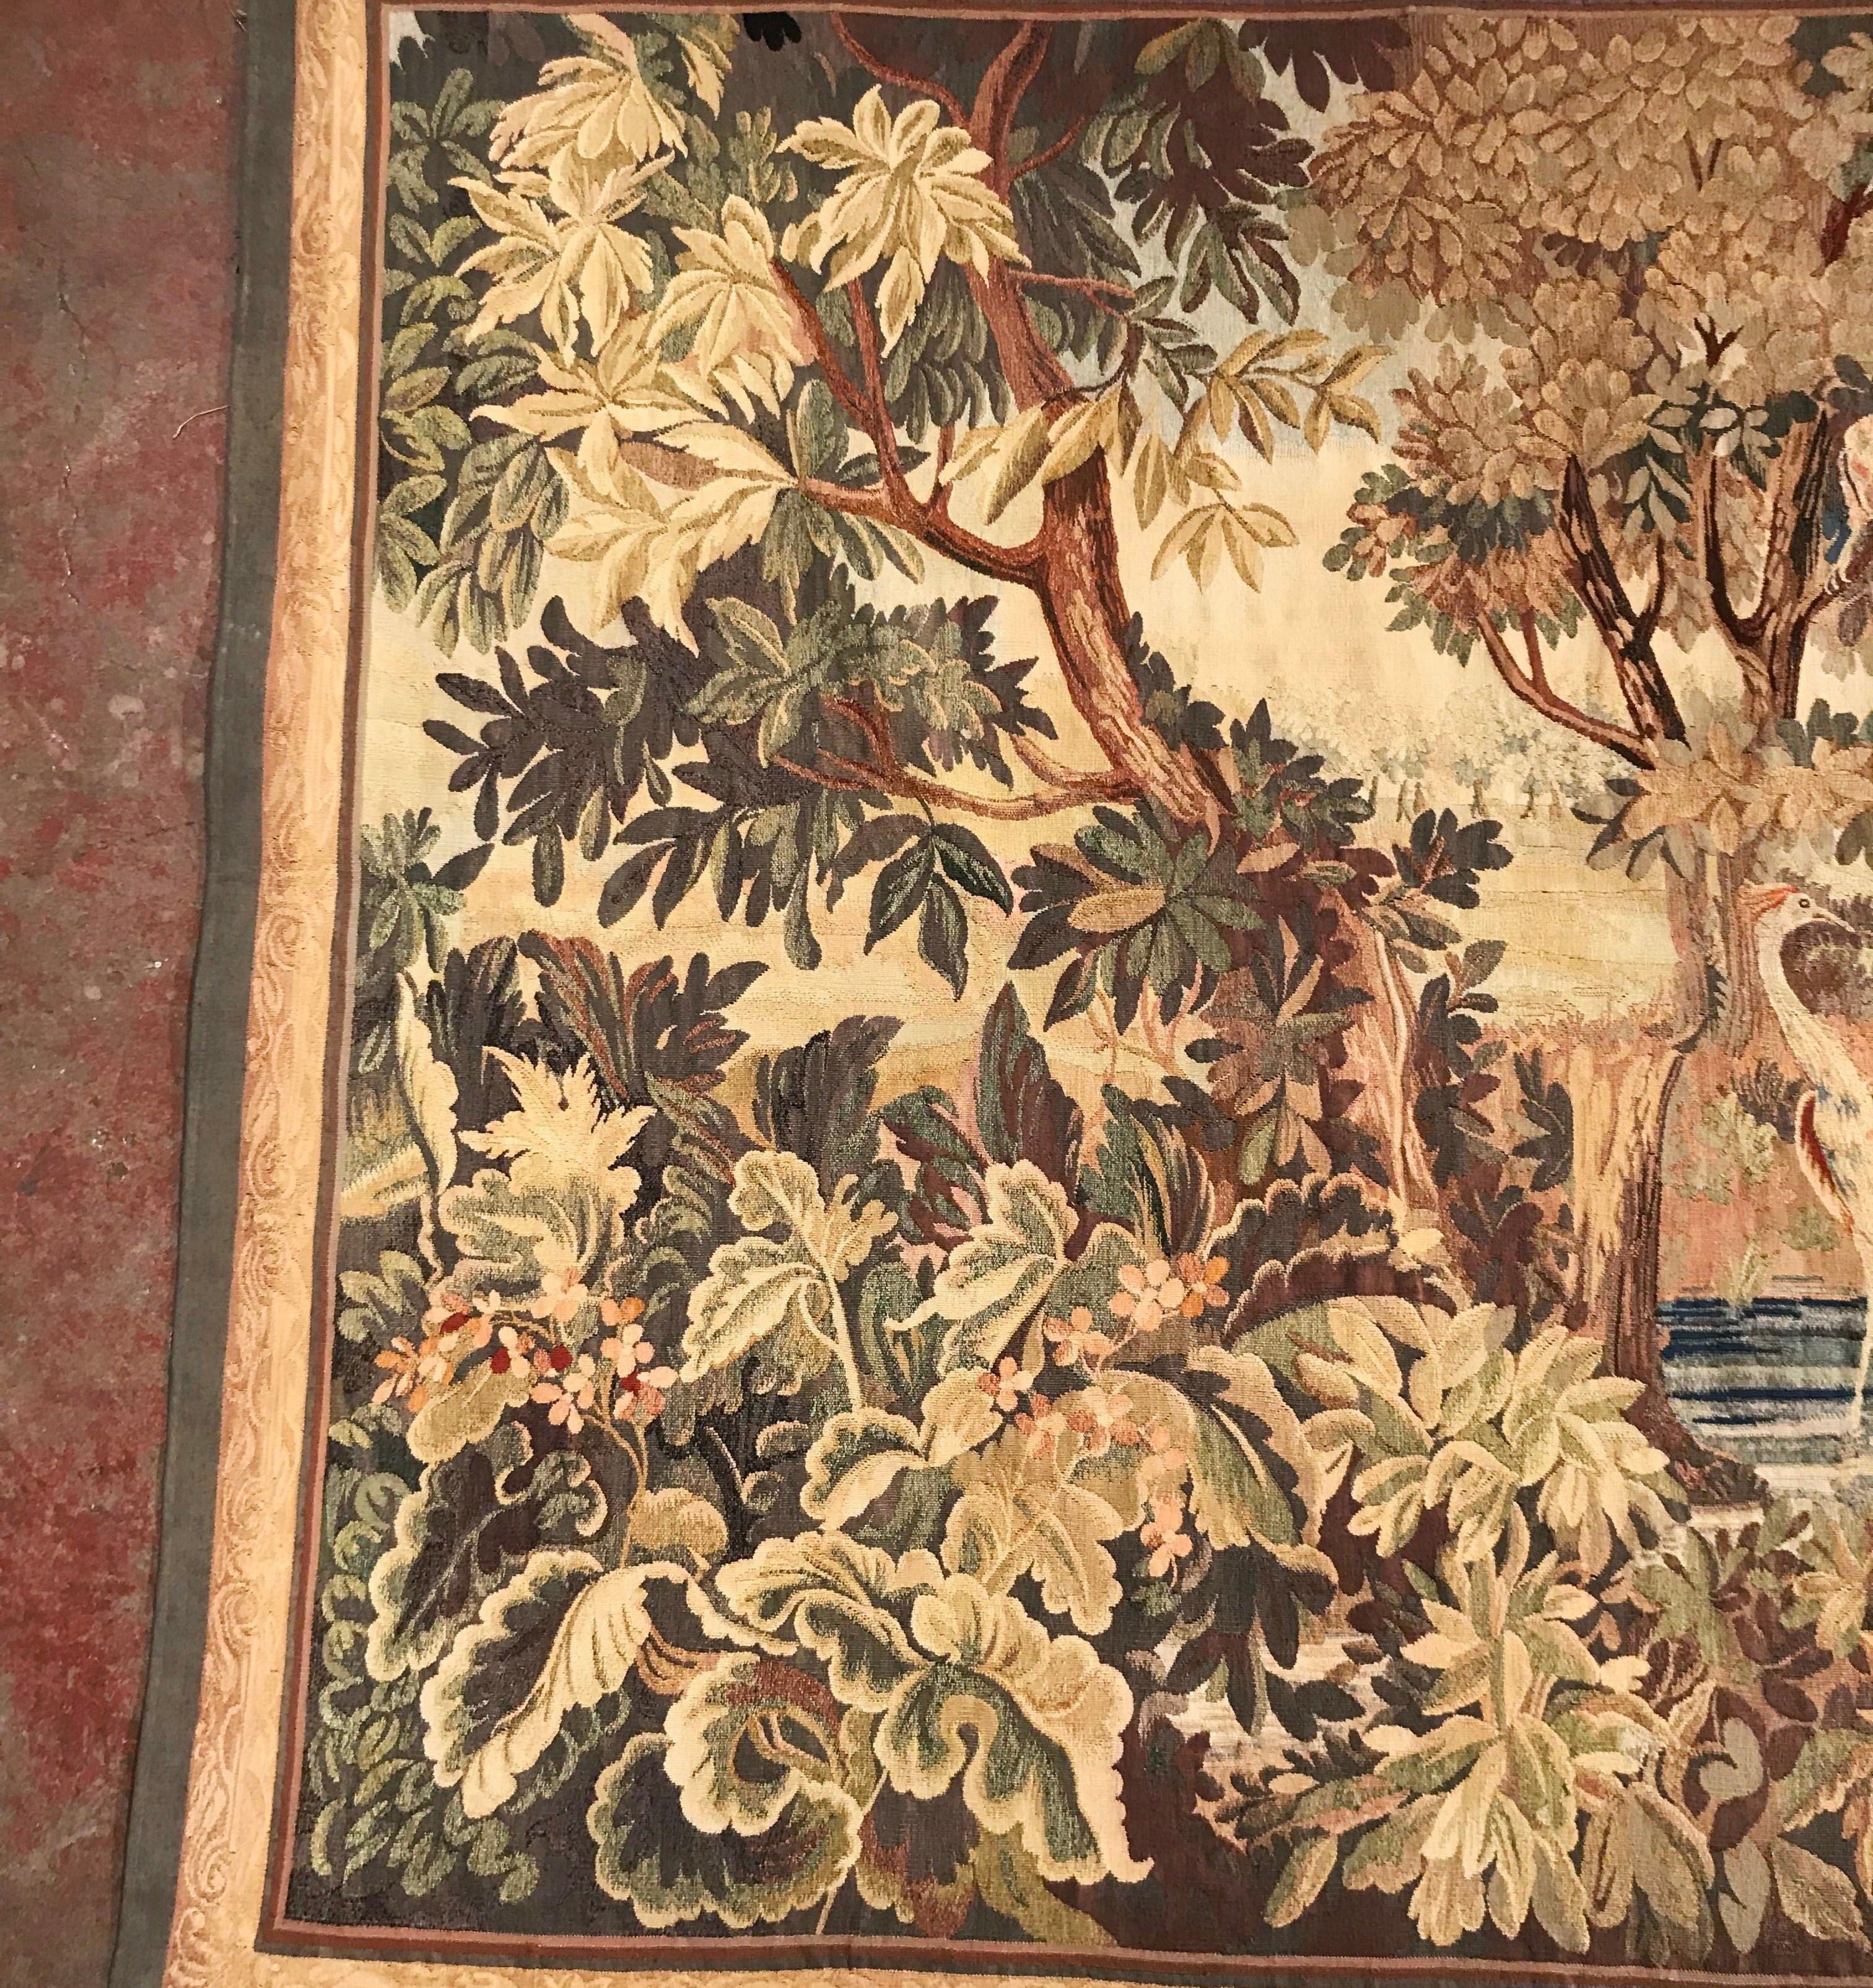 Hand-Woven Late 19th Century French Verdure Aubusson Tapestry with Birds, Trees and Stream